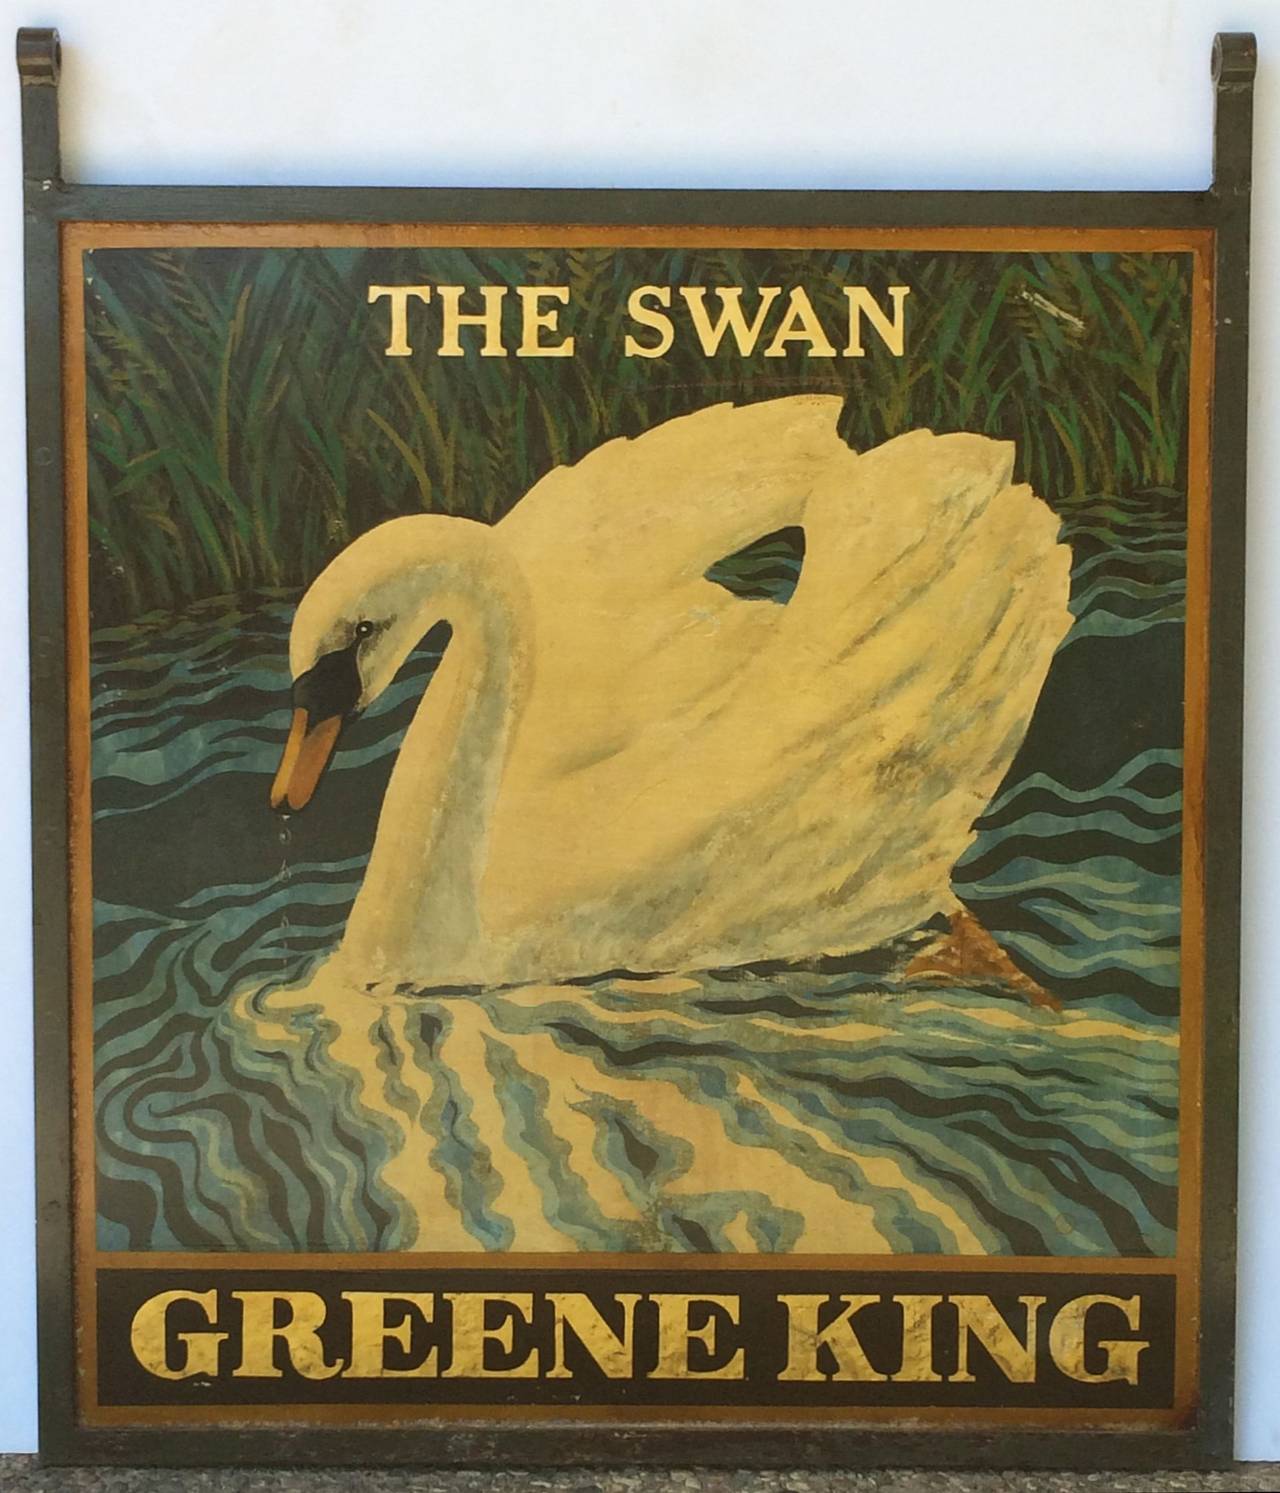 An authentic English pub sign (two-sided) featuring a painting of a swan on water among reeds, entitled: The Swan, from an original Greene King pub.

Marked: Greene King (Greene King is a British brewery established in 1799 in Bury St Edmunds,